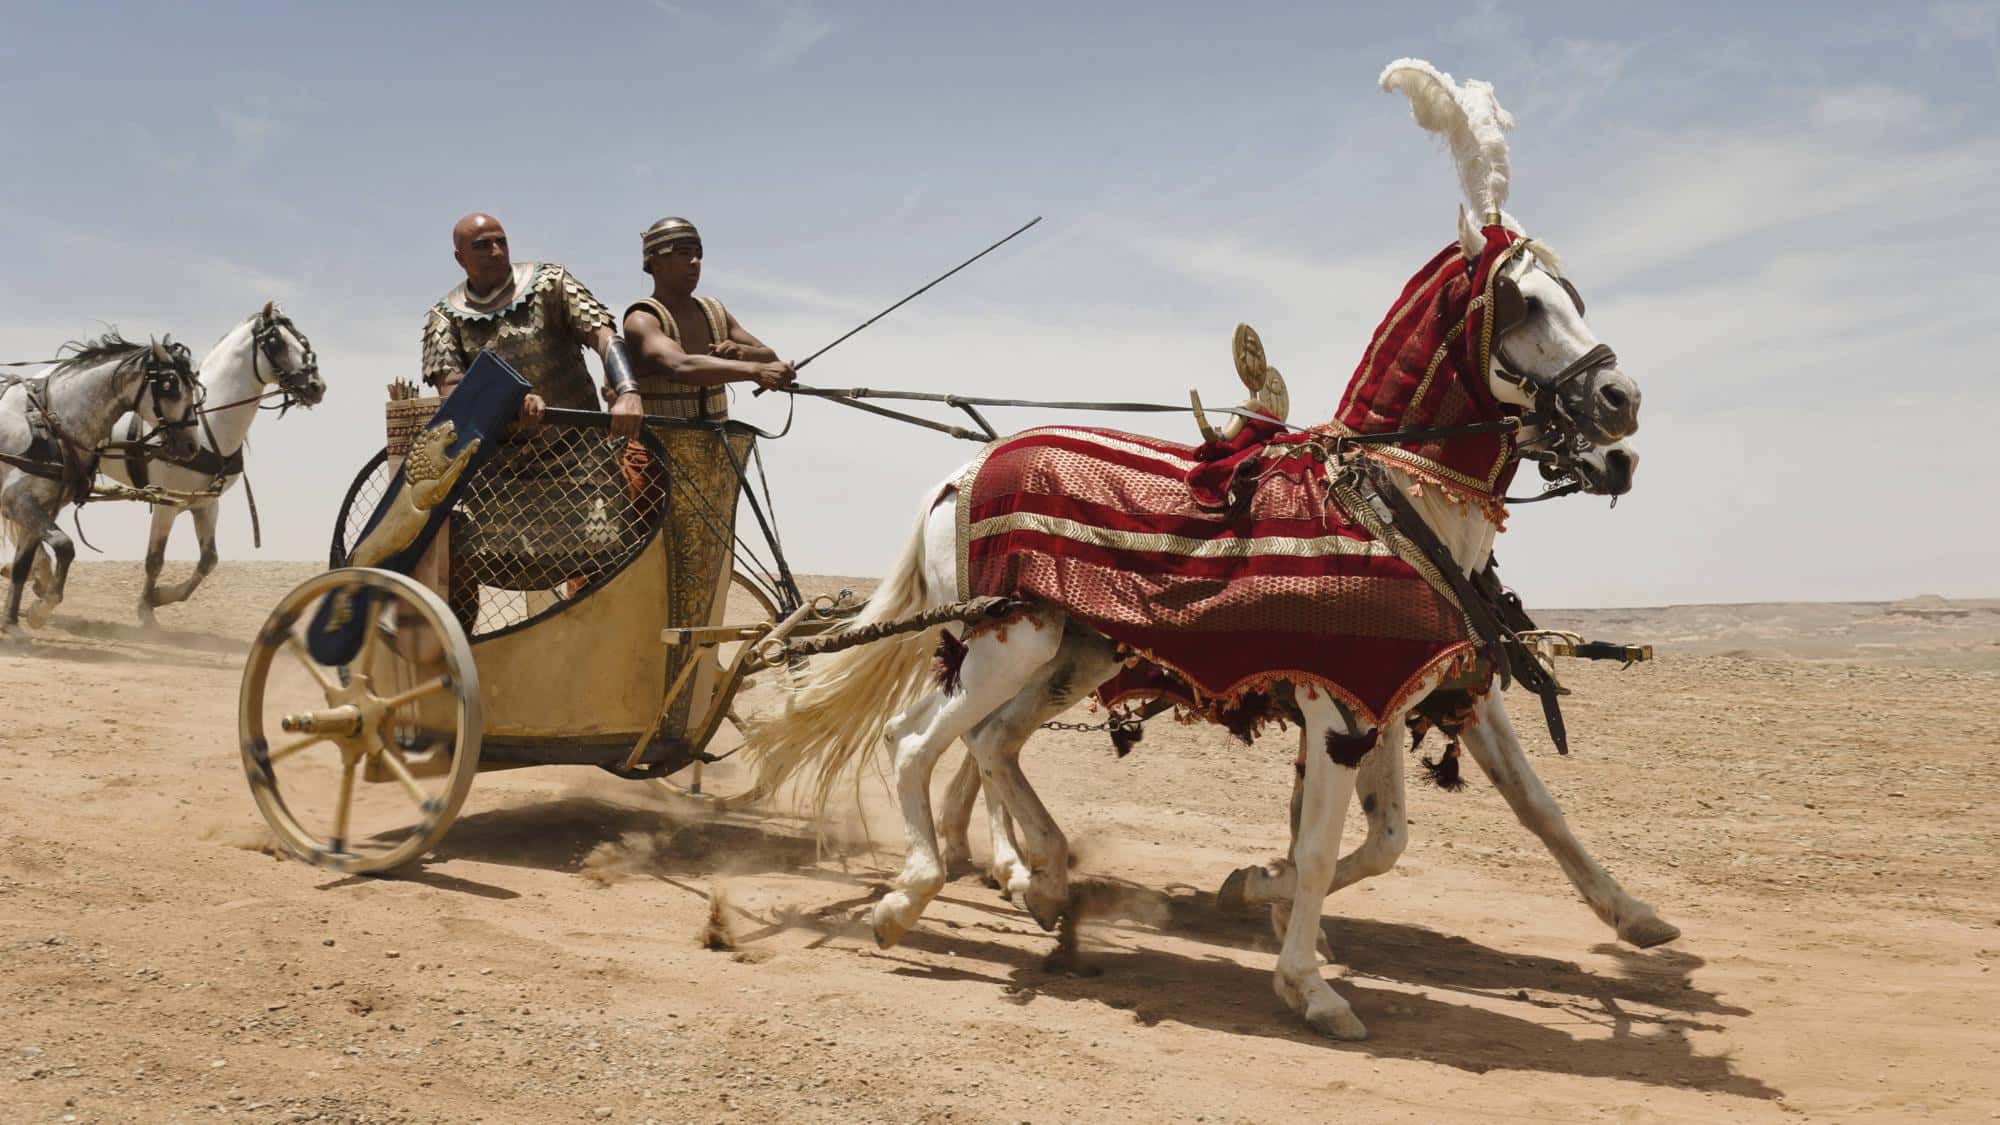 do people in egypt still have chariot races